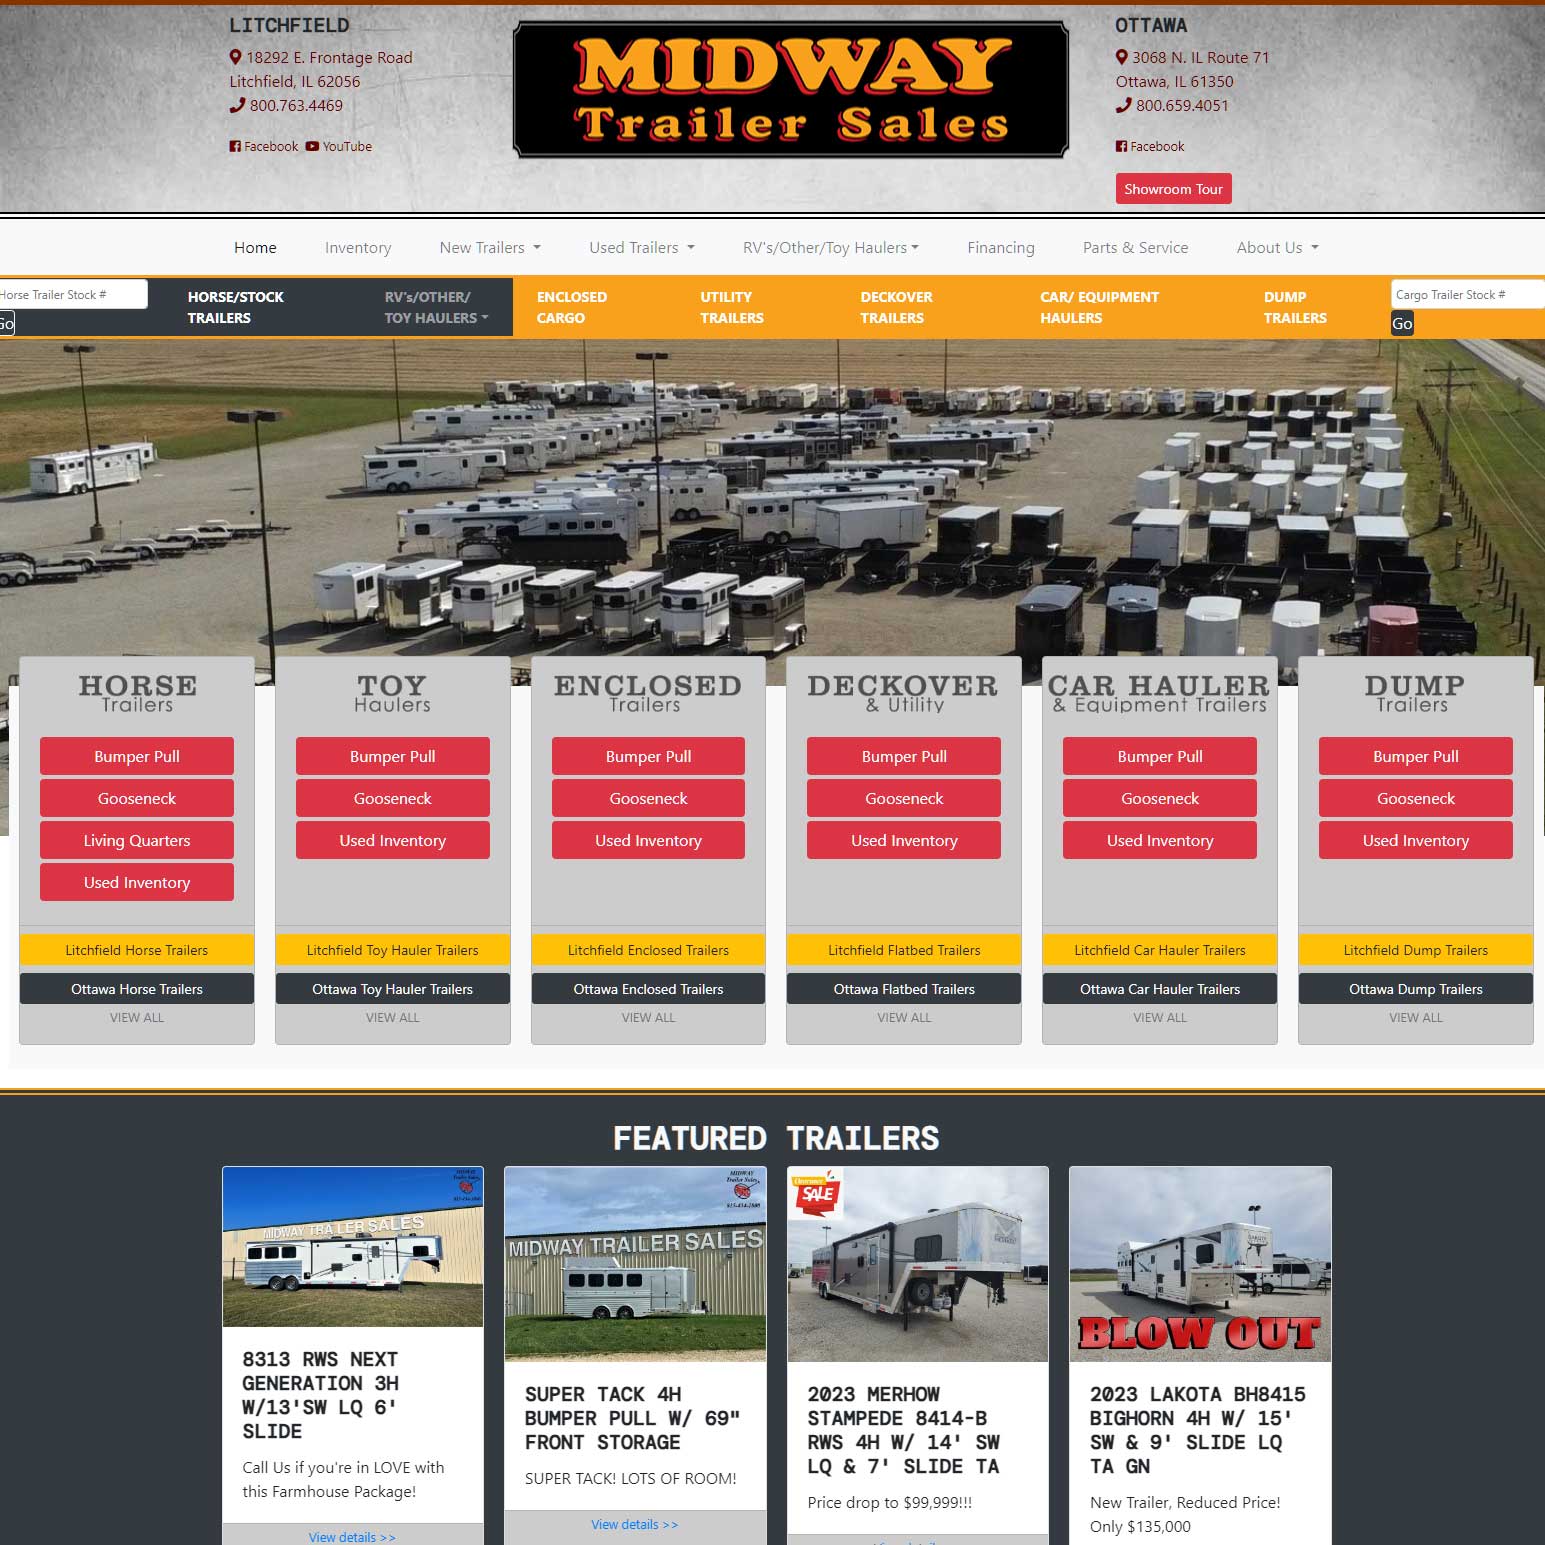 Midway Trailer Sales